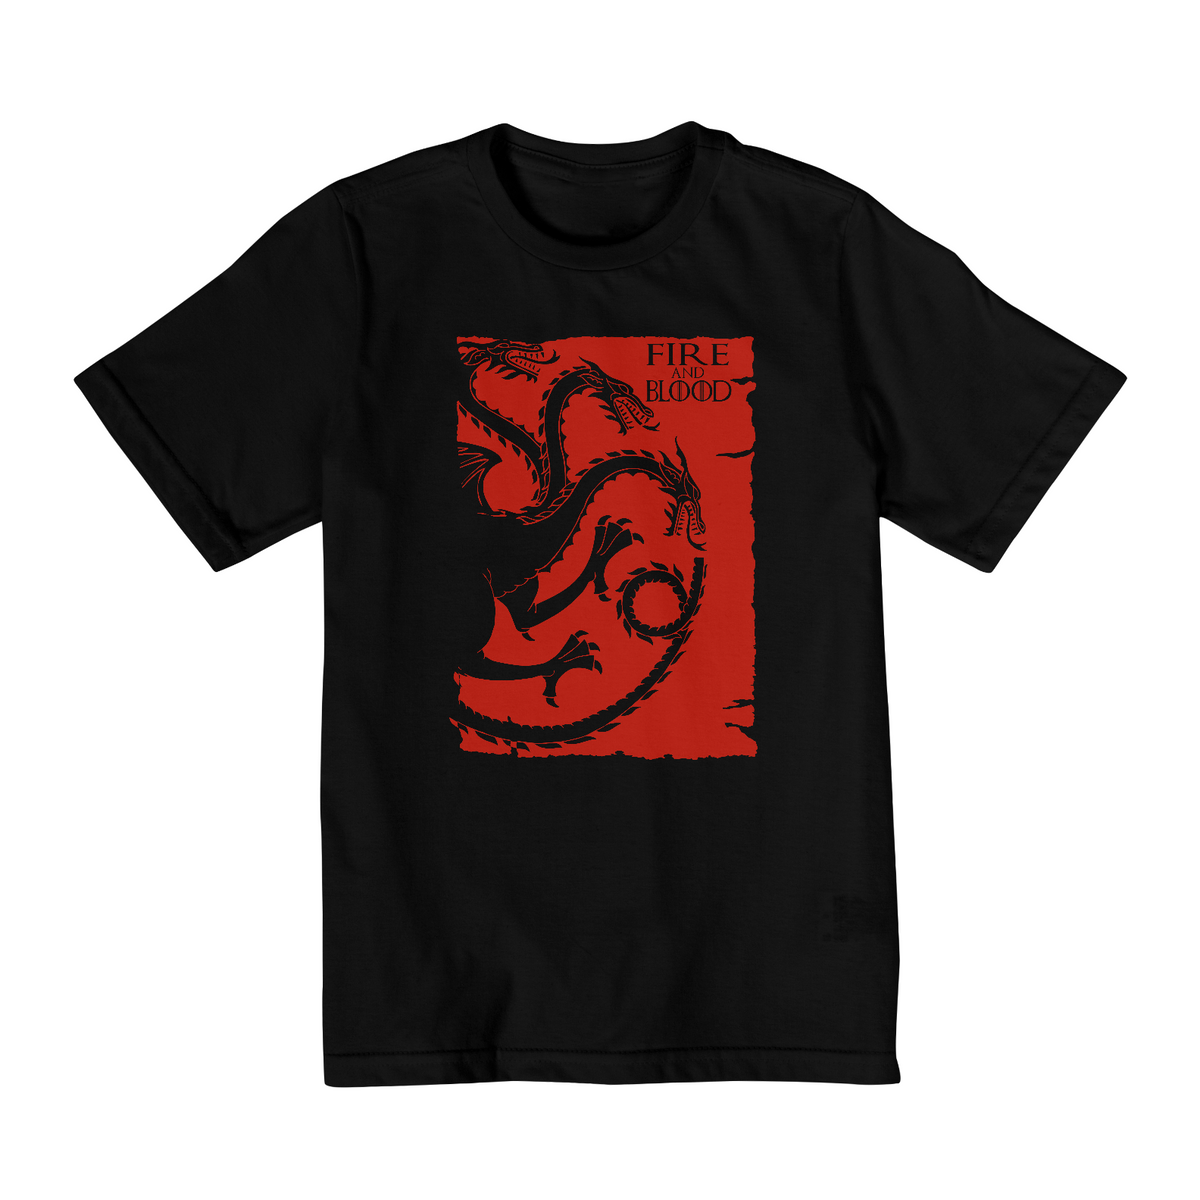 Nome do produto: Camiseta Infantil (2 a 8) Game of Thrones Fire And Blood